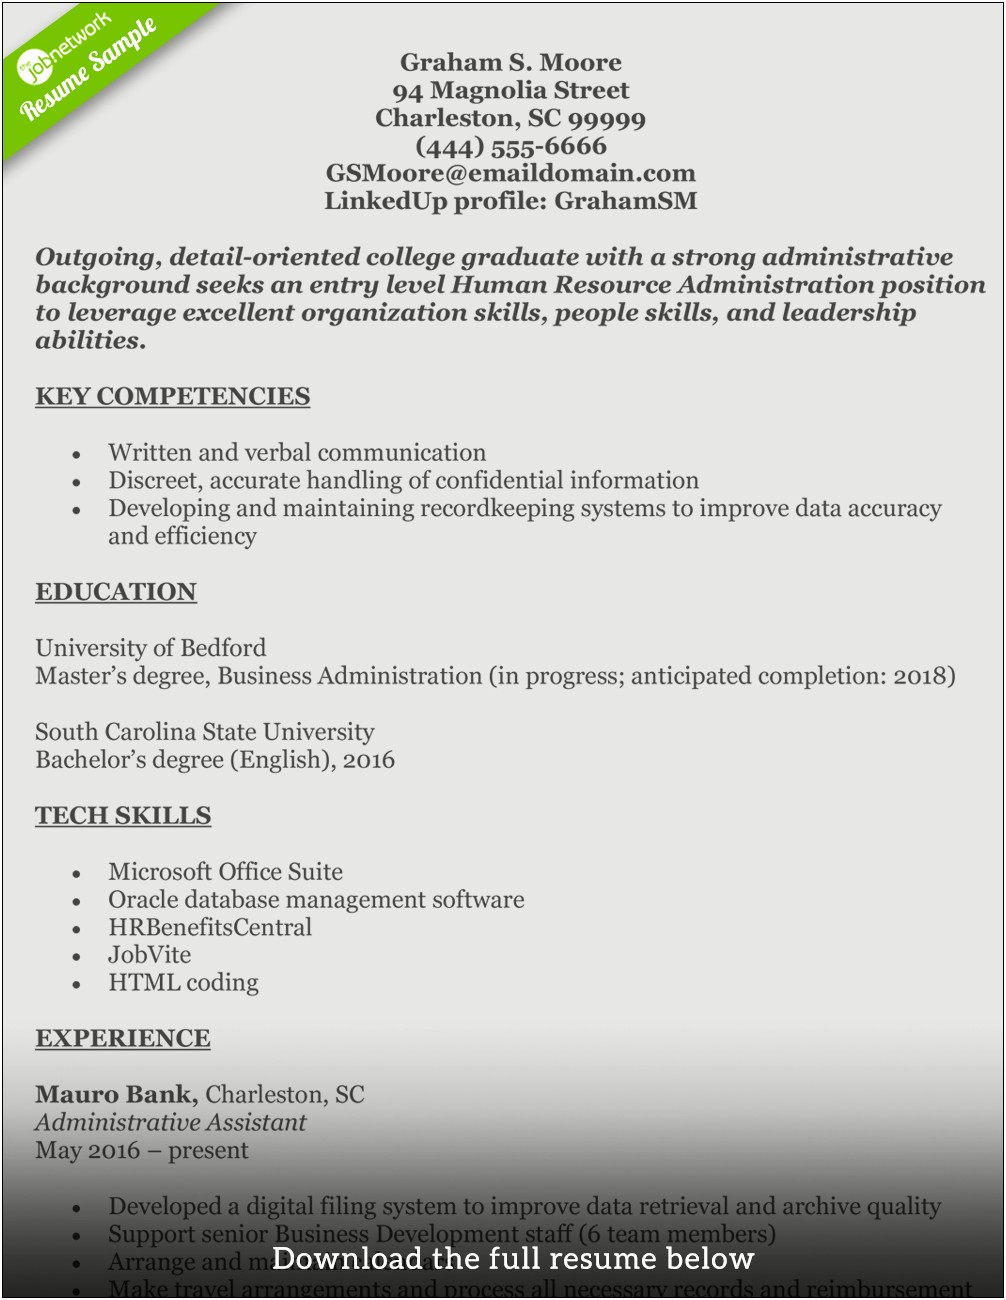 Professional Summary Resume For Recent Graduate Examples